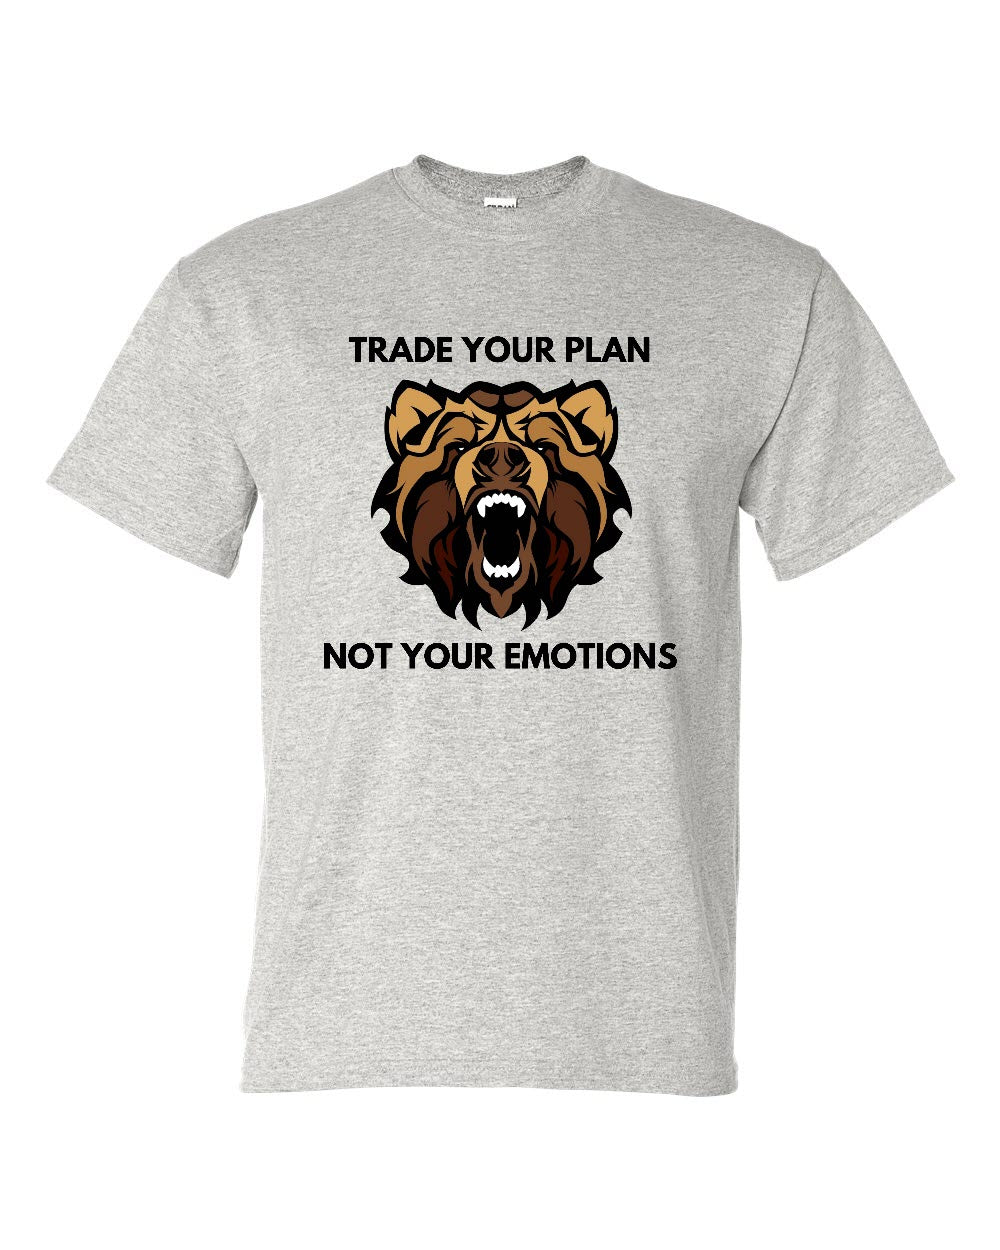 Trade Your Plan, Not Your Emotions